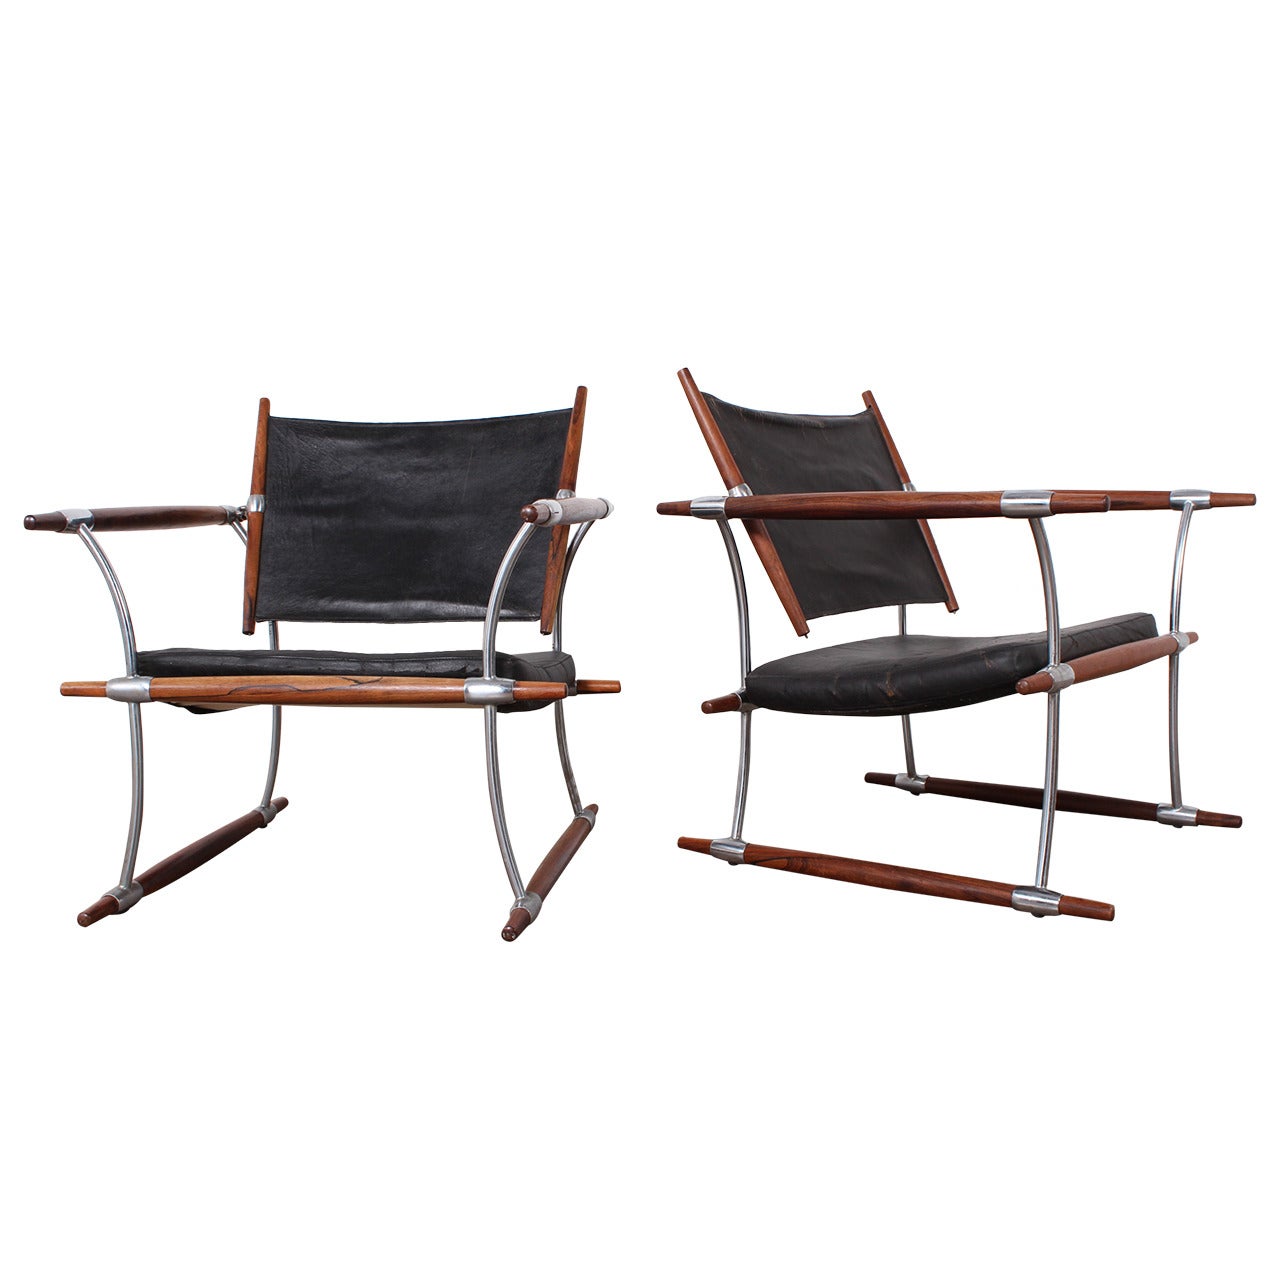 Pair of Rosewood Lounge Chairs by Jens Quistgaard